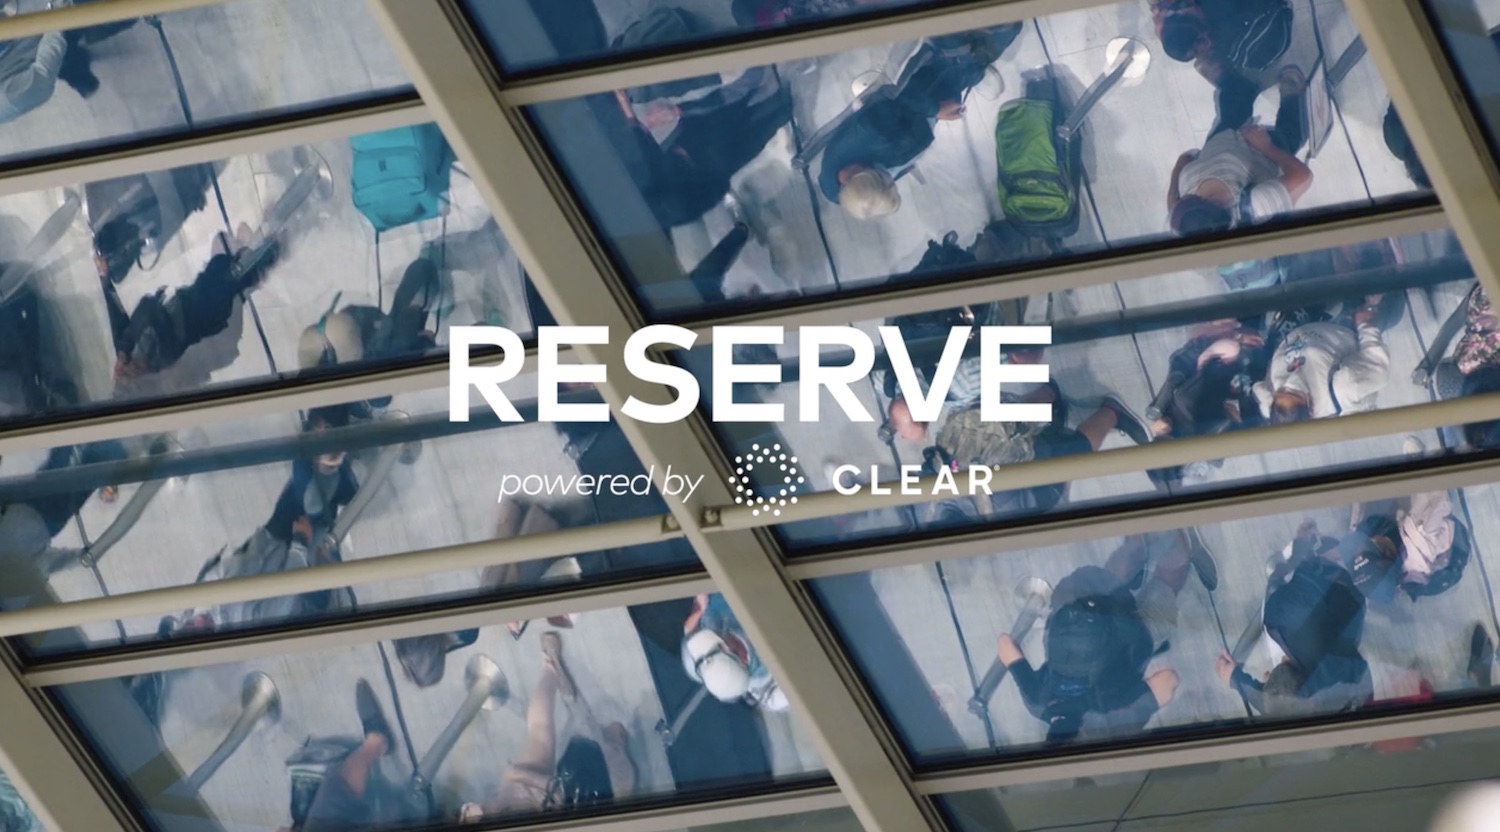 reserve by clear at MCO